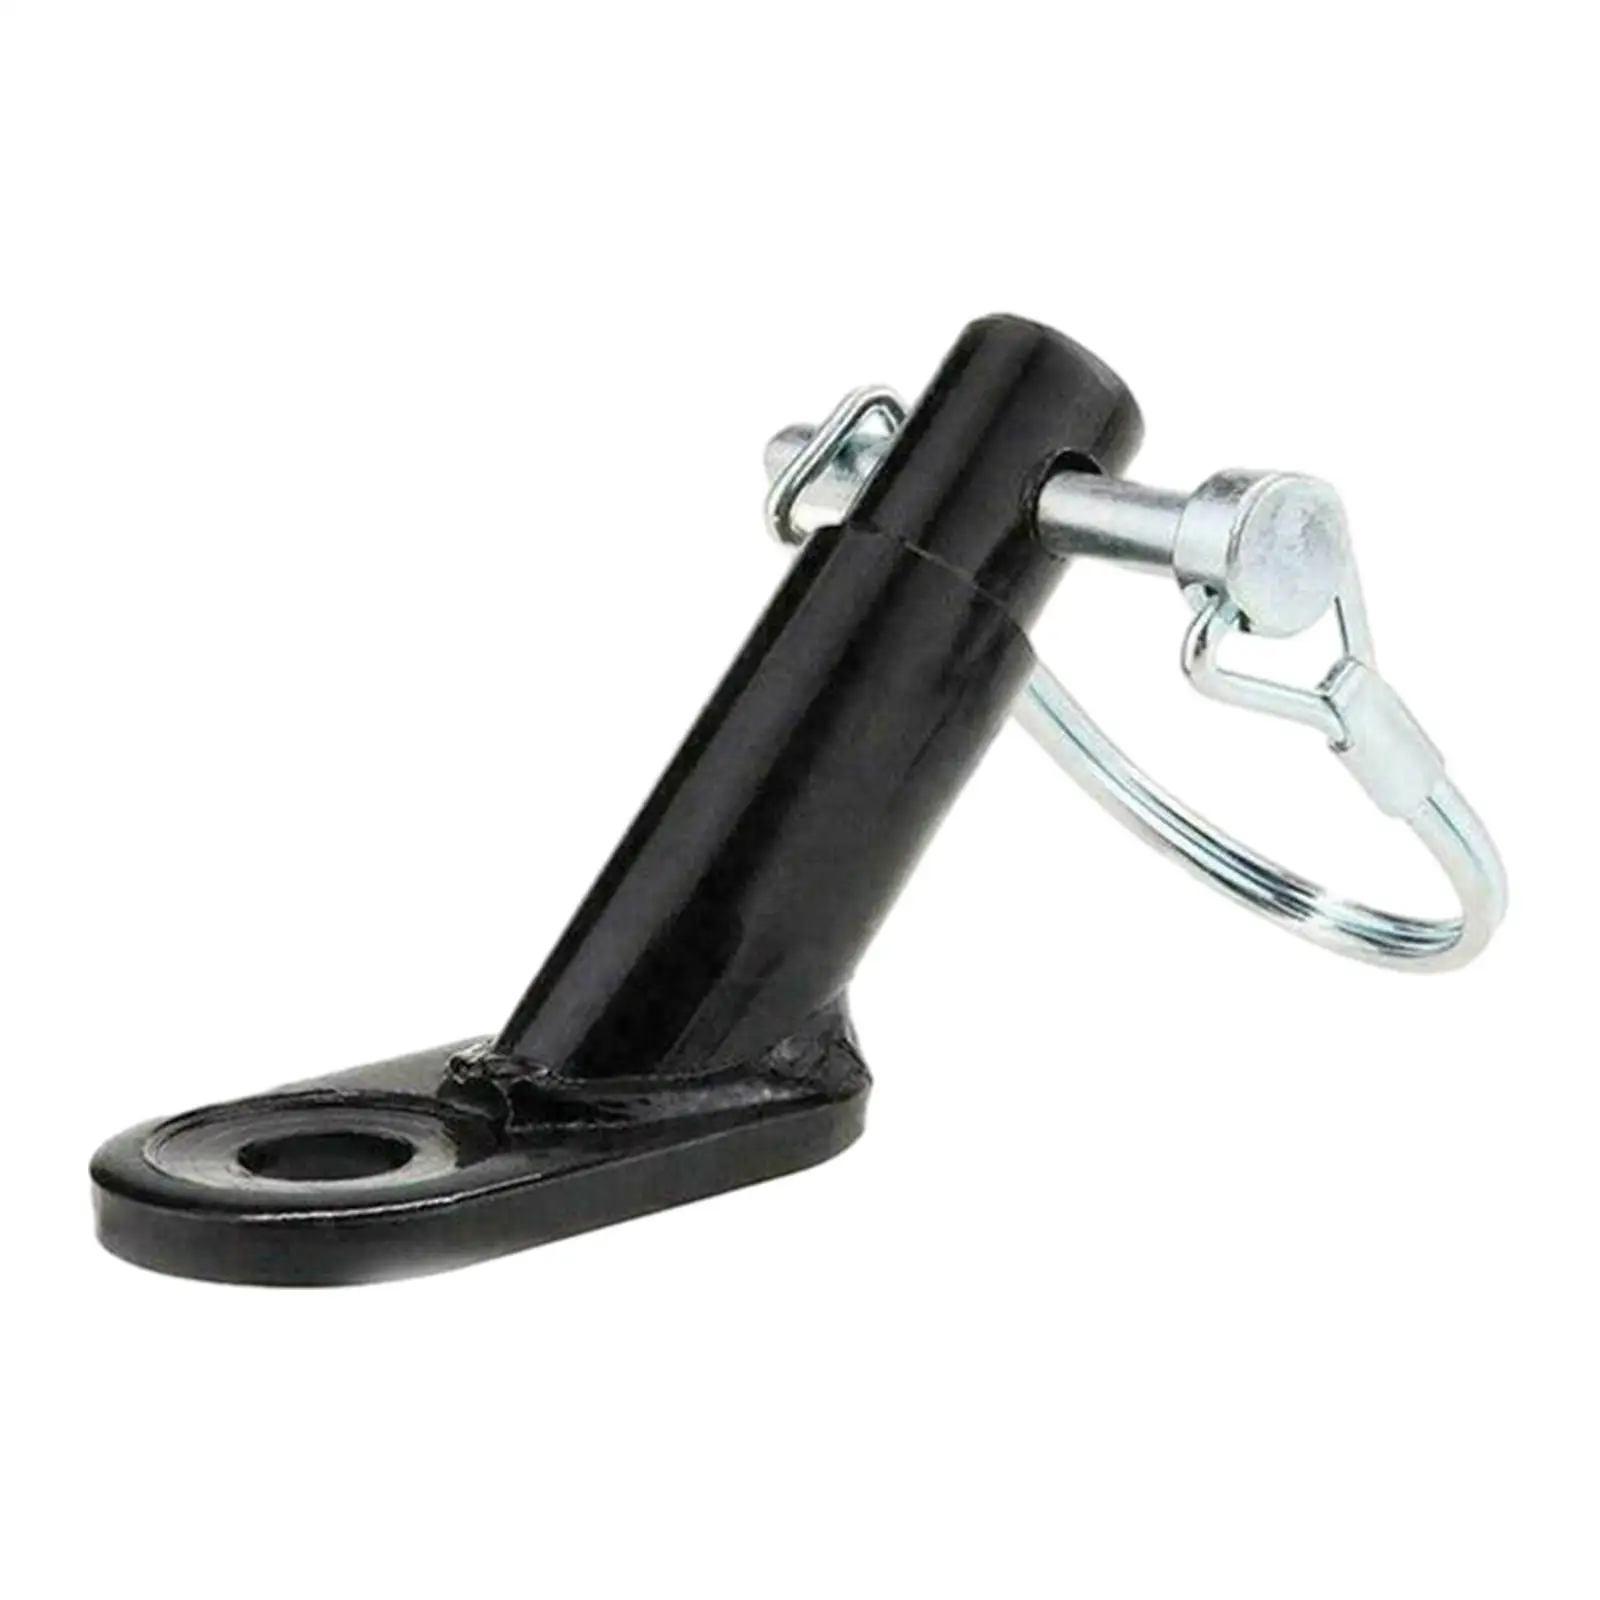 Bike Trailer Hitch Angled Elbow Steel Universal for Kids Trailer Cargo Trailers Cycling Equipment Bike Trailer Attachment